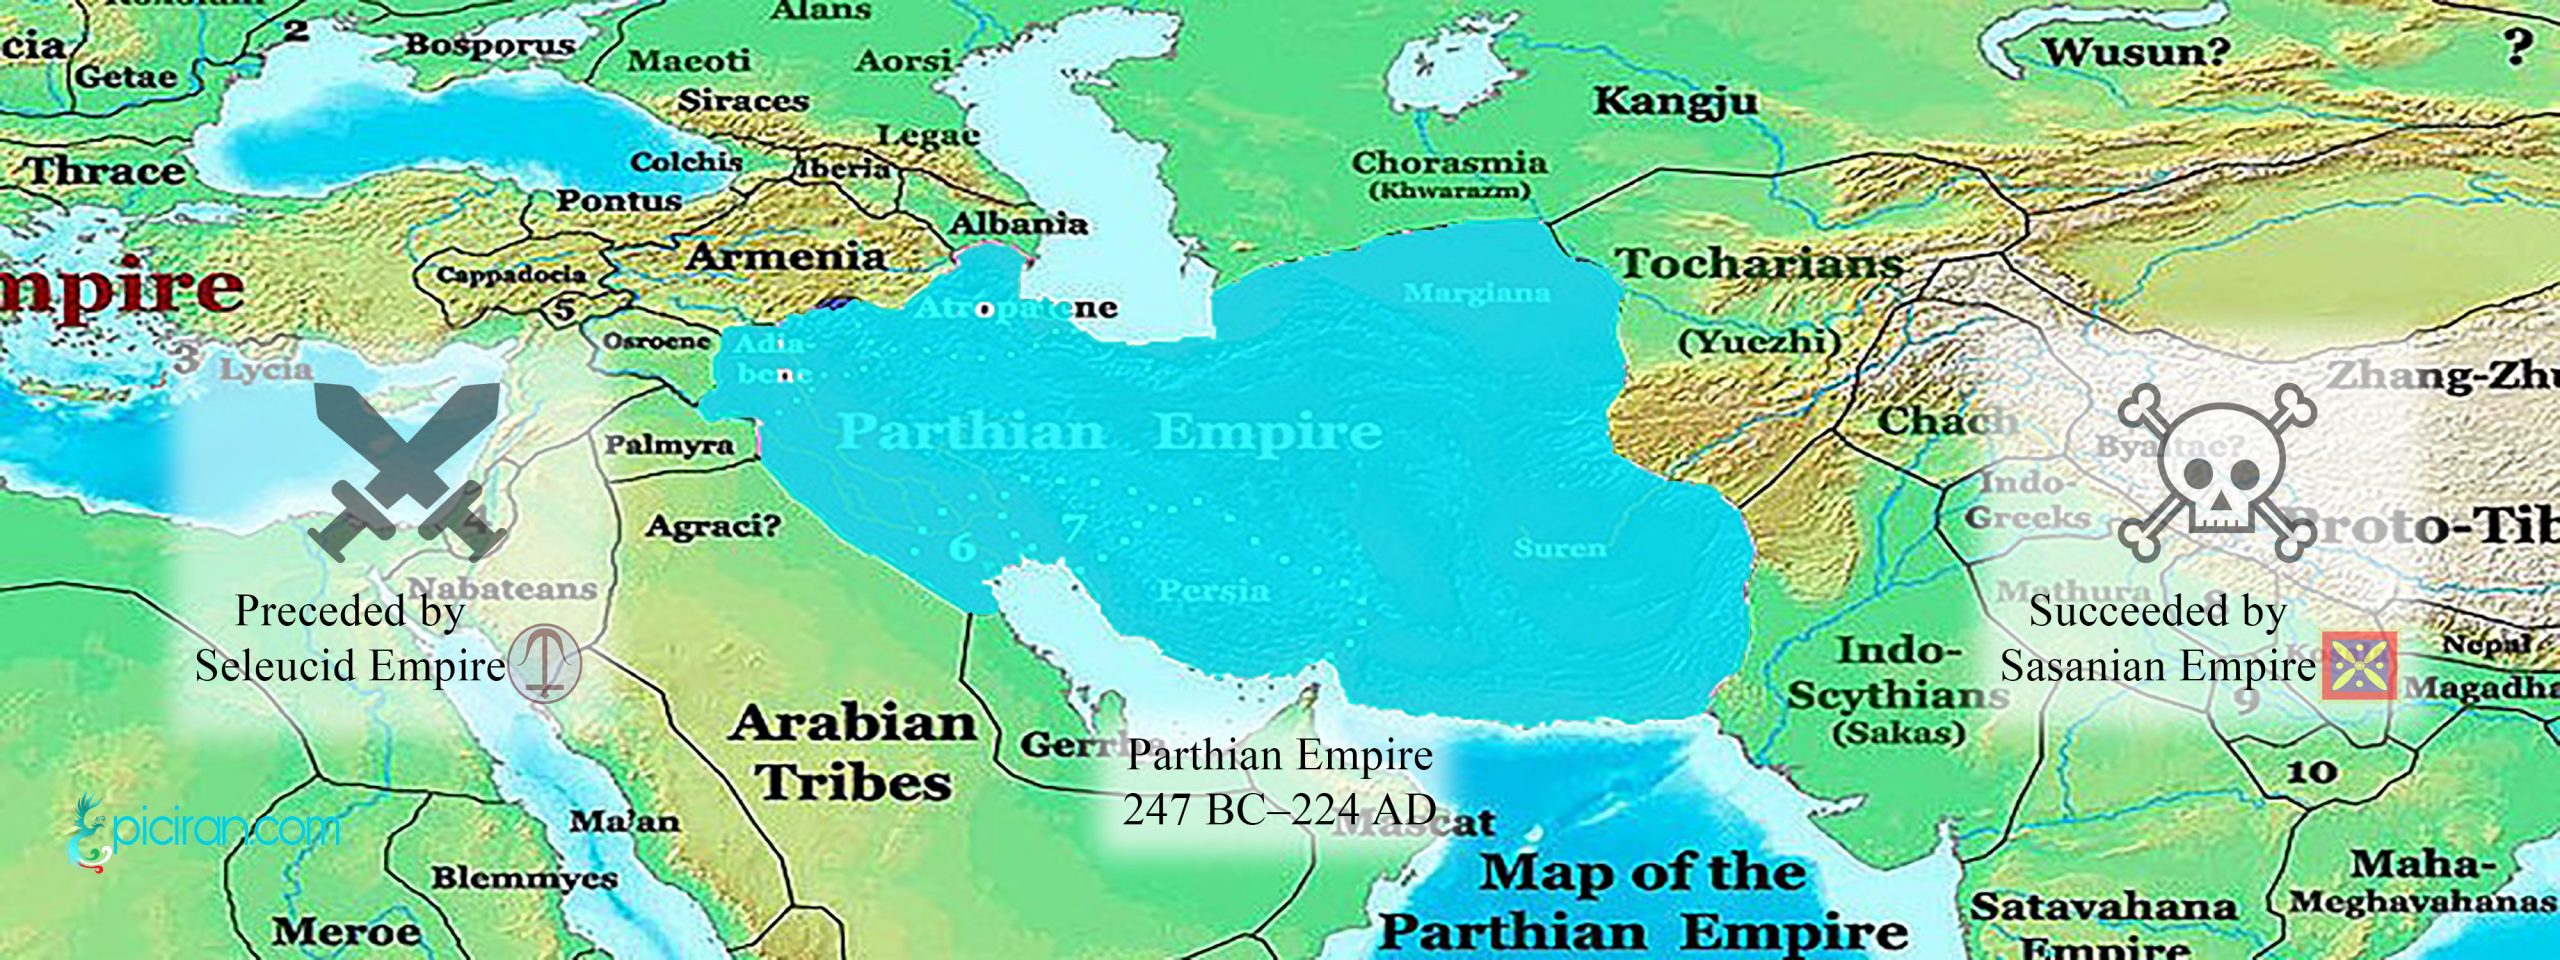 Parthian Empire – From the rise to the fall of Parthians